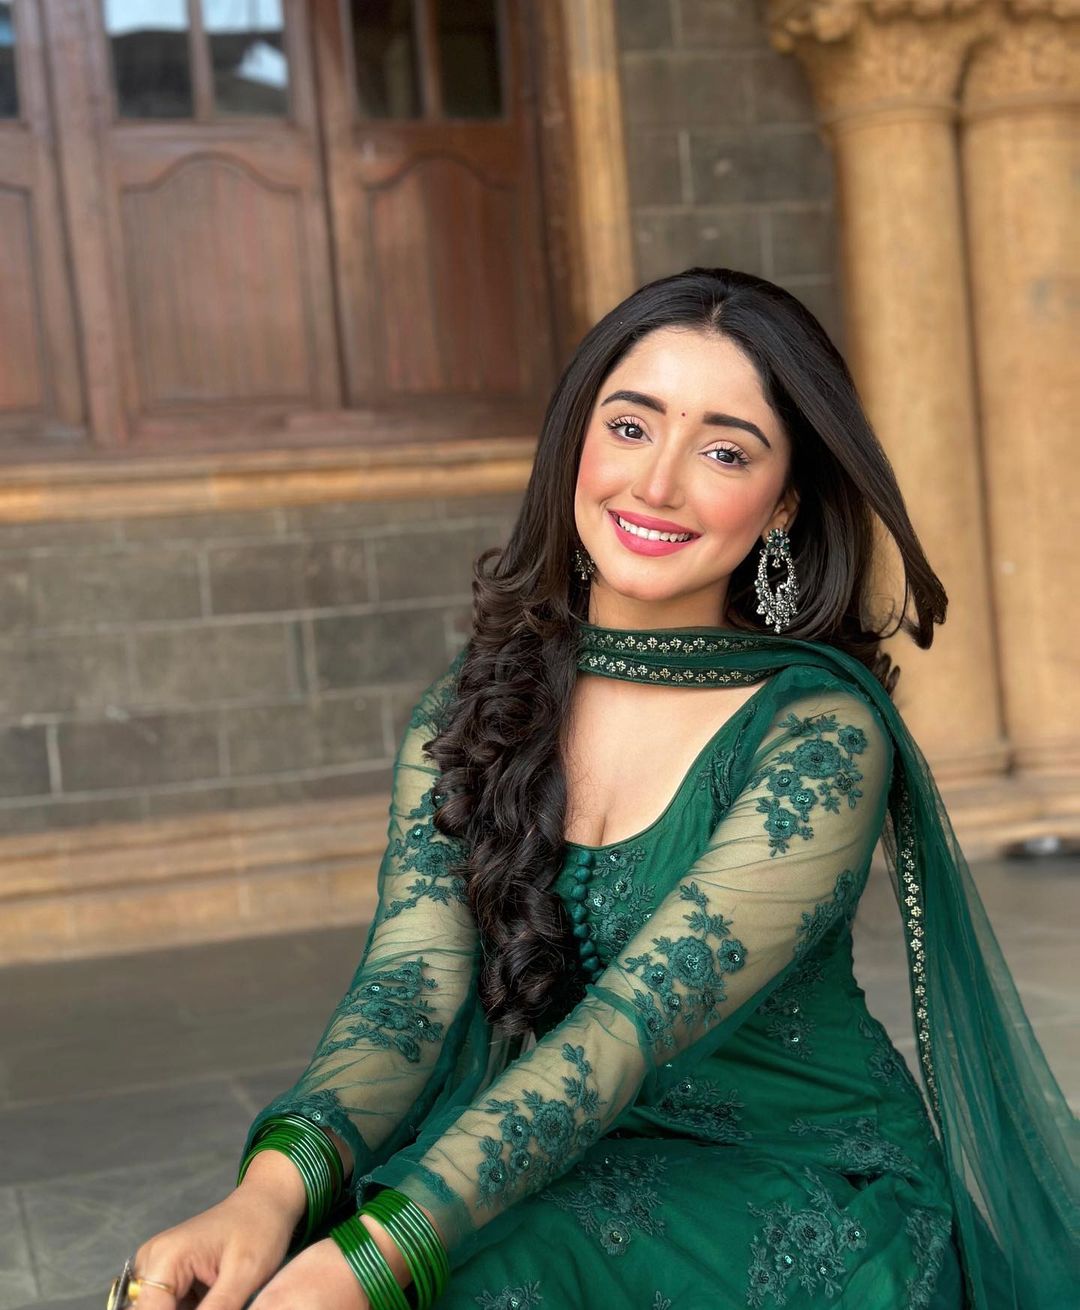 World Music Day Exclusive: KumKum Bhagya Actress shared her love for music; opens up about how the music brings her joy and memories 